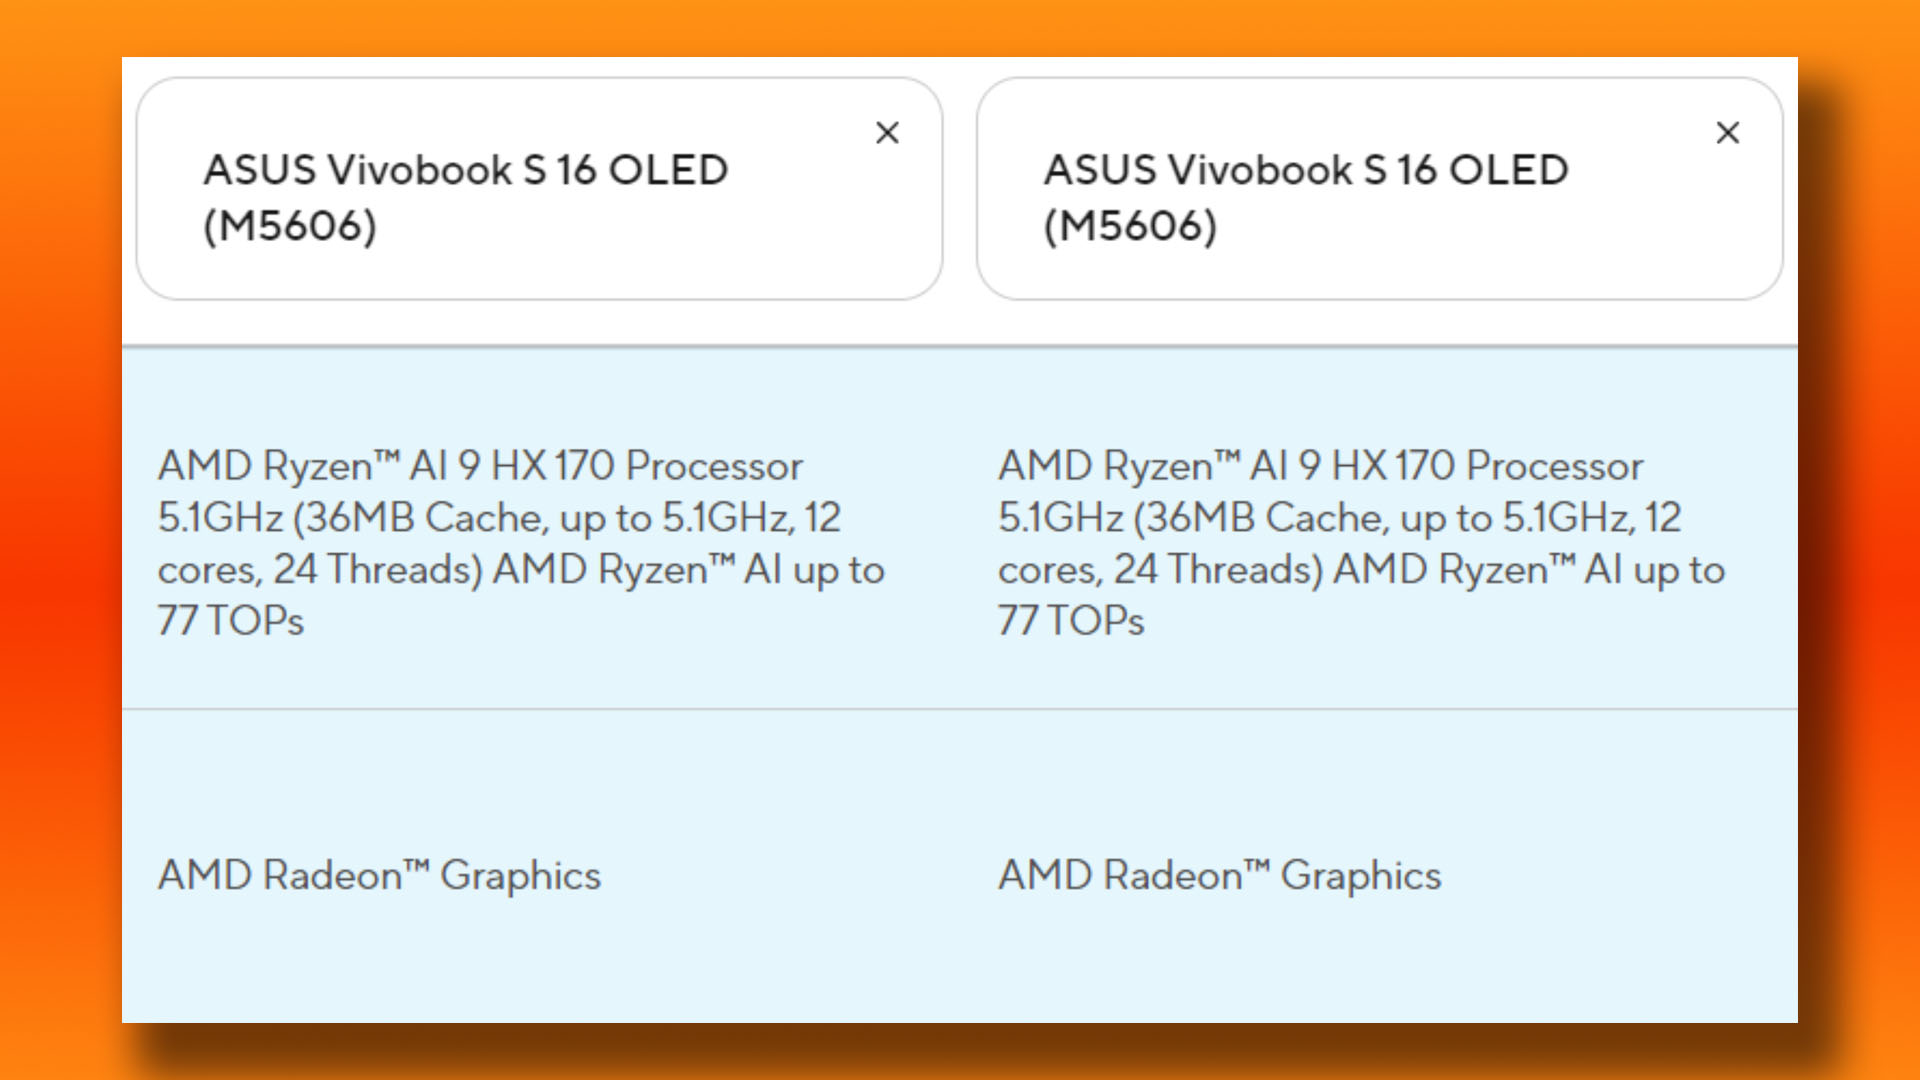 AMD’s new Ryzen CPU name just leaked, and it’s not what you expect: AMD Ryzen AI Asus Vivobook X Twitter screenshot